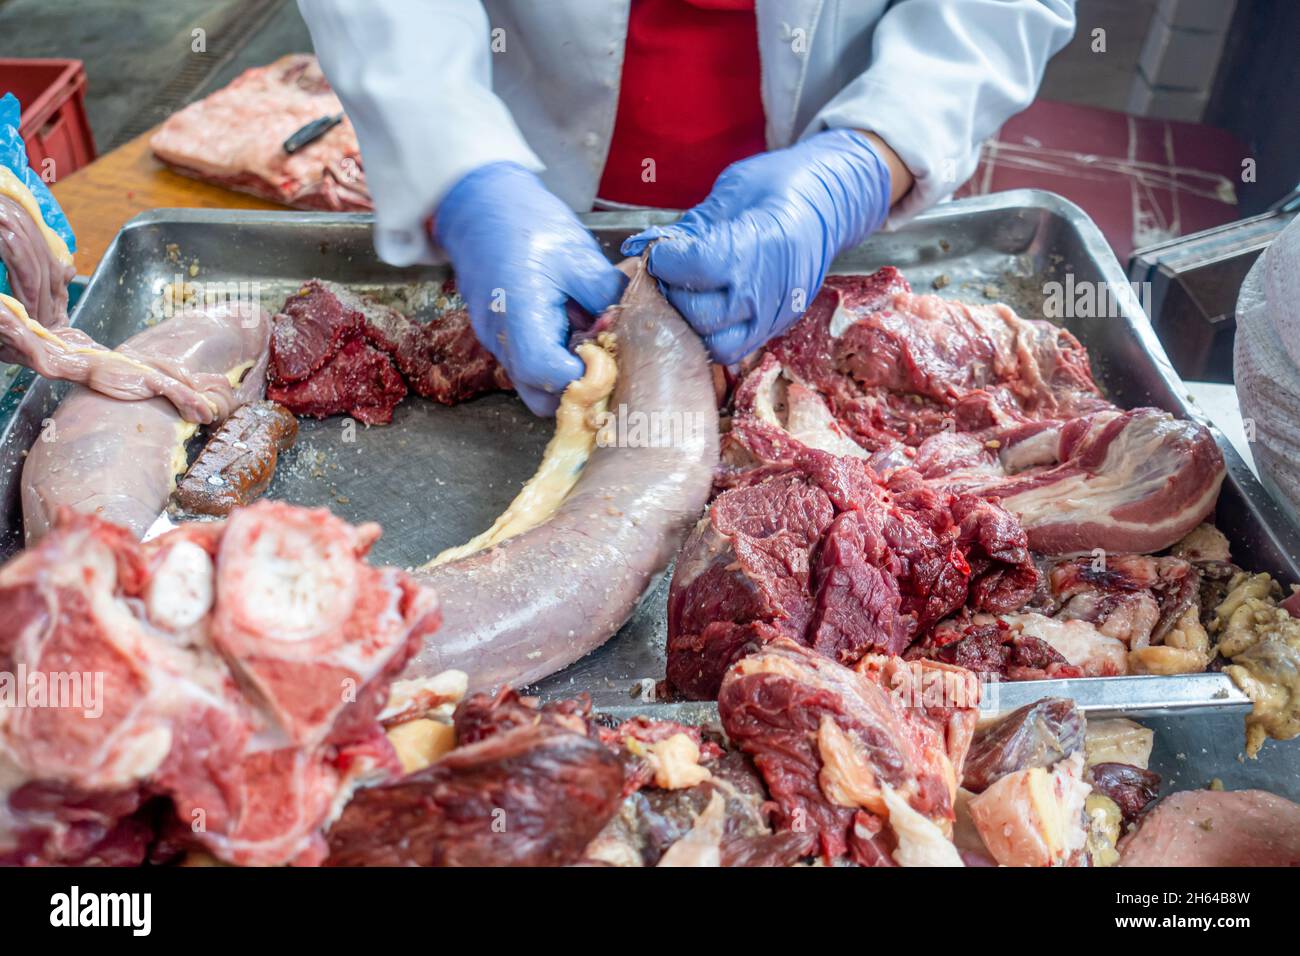 Qazy, horse meat sausage is put into qarta (horse colon). Packaged by the hands in gloves to be sold in the meat market Altyn Orda, Almaty, Kazakhstan Stock Photo